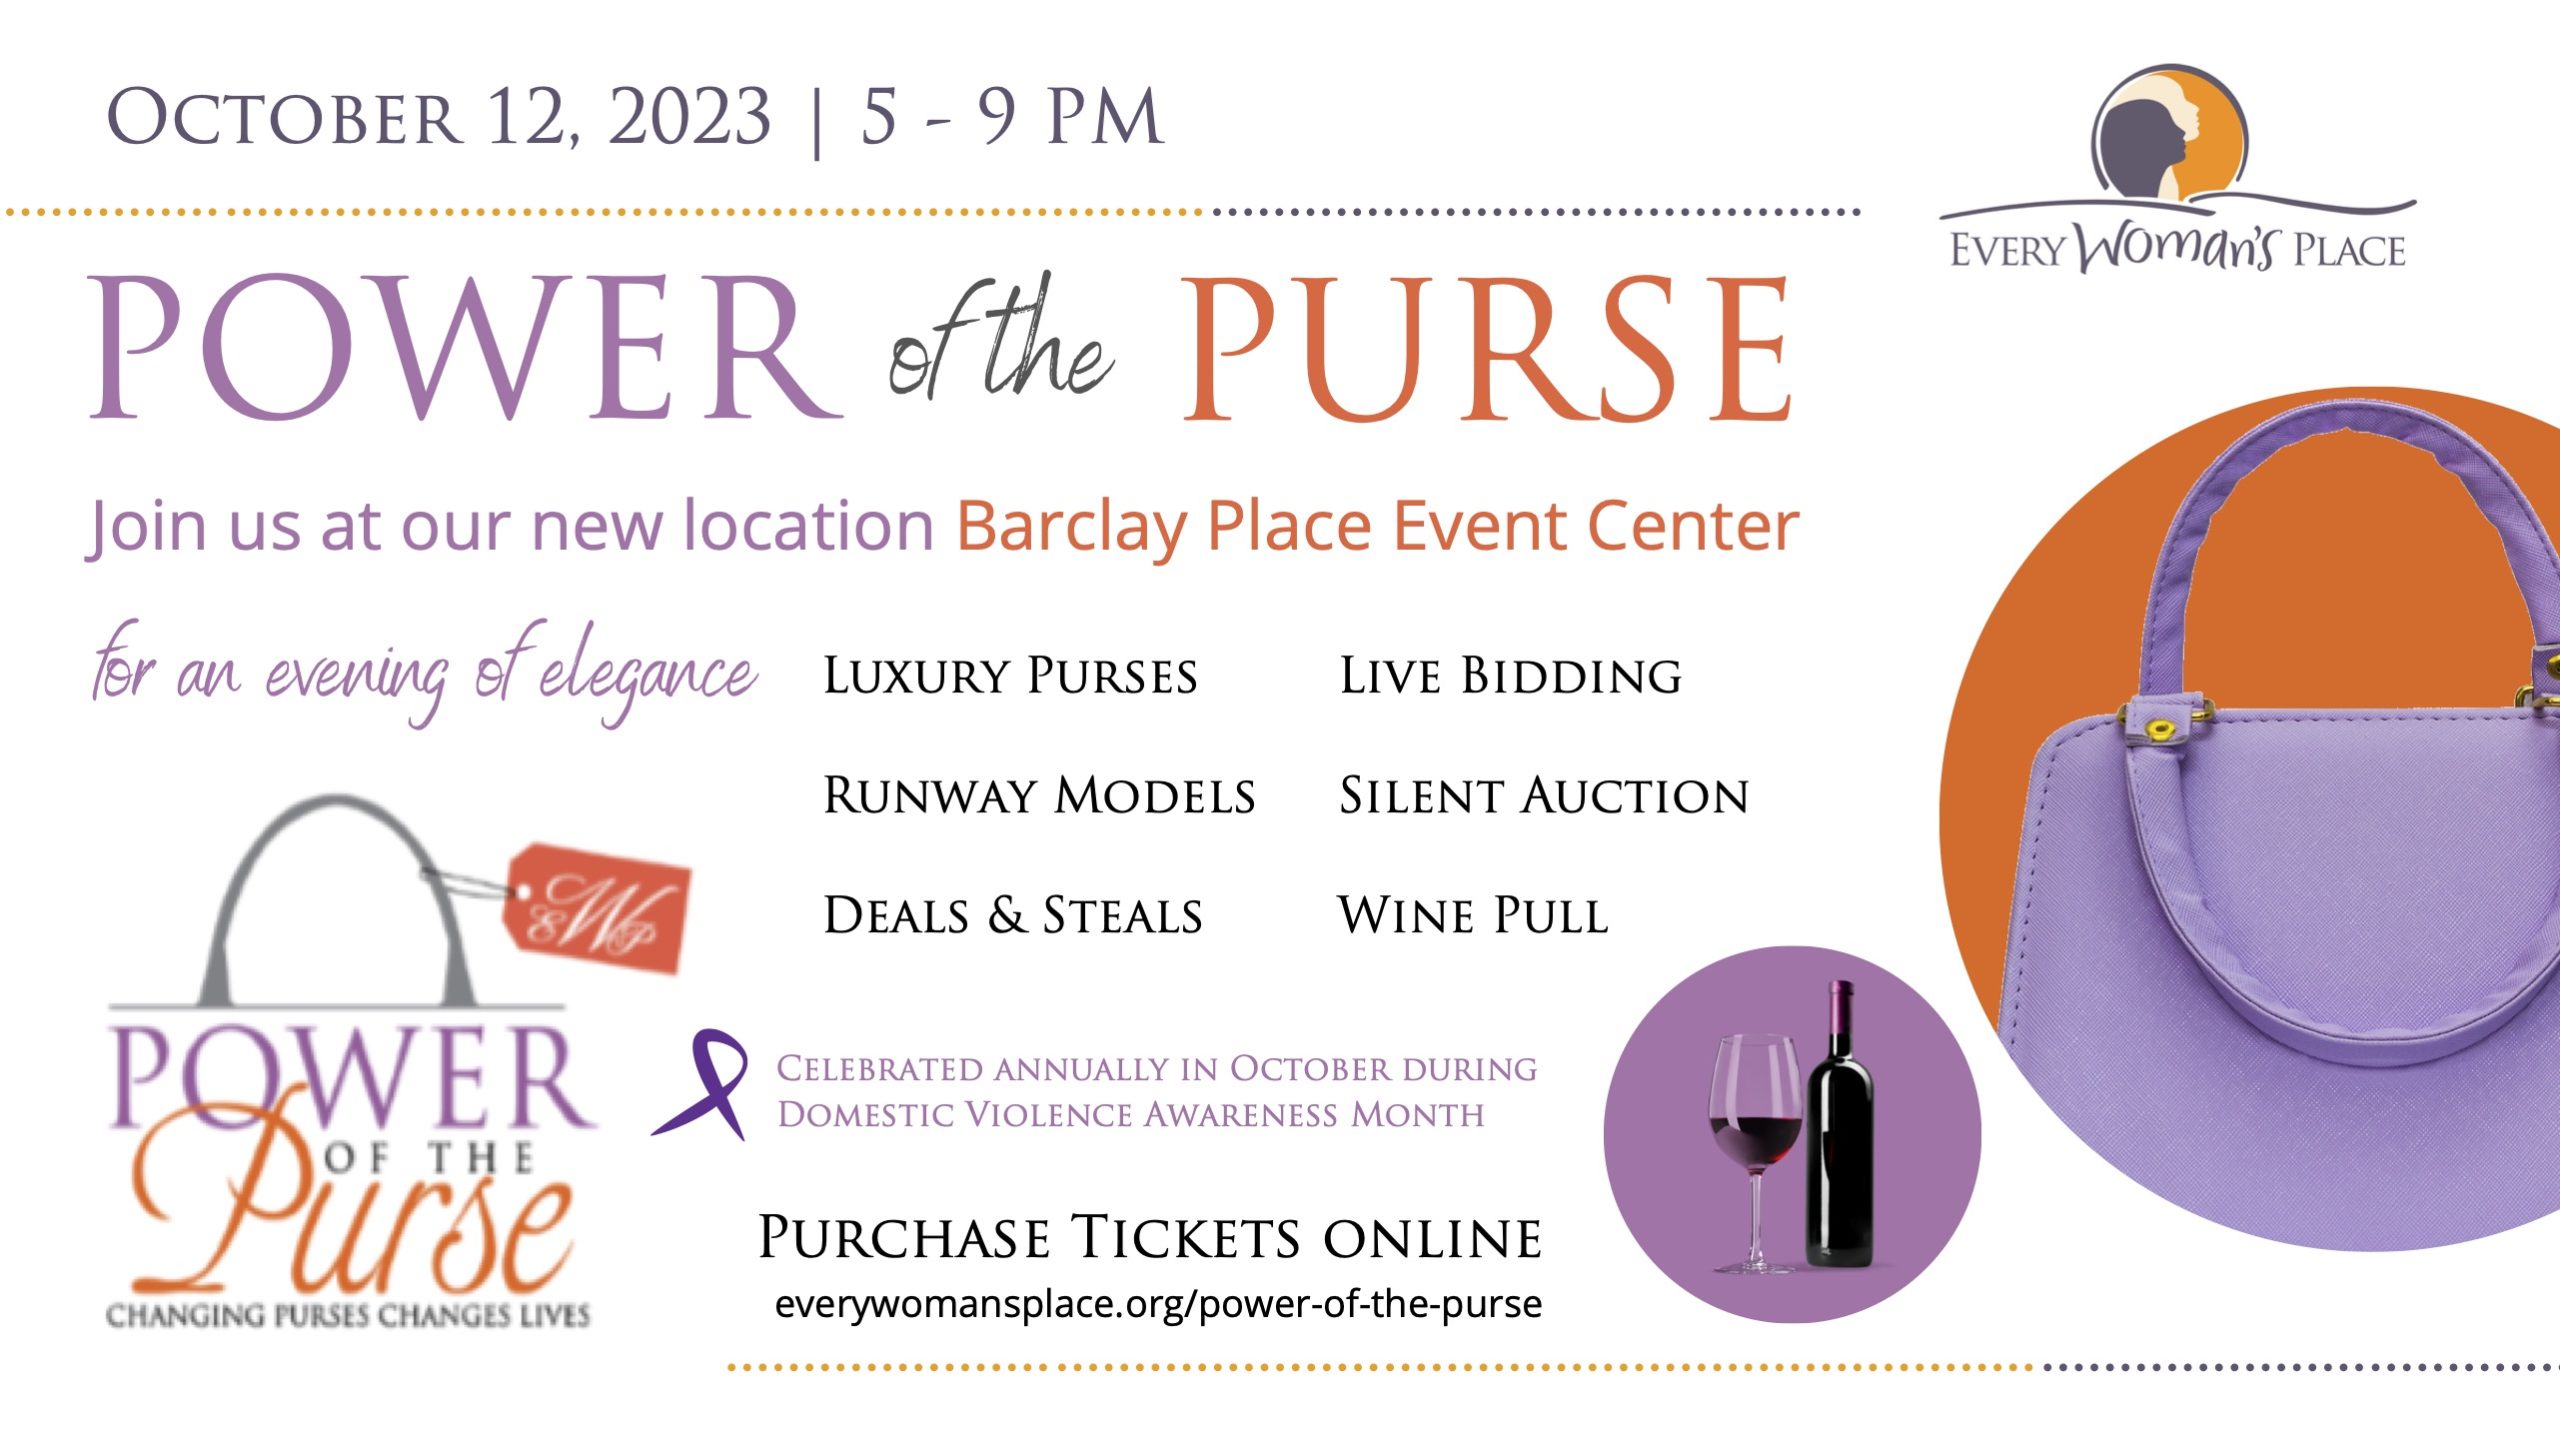 Power of the Purse - Every Woman’s Place